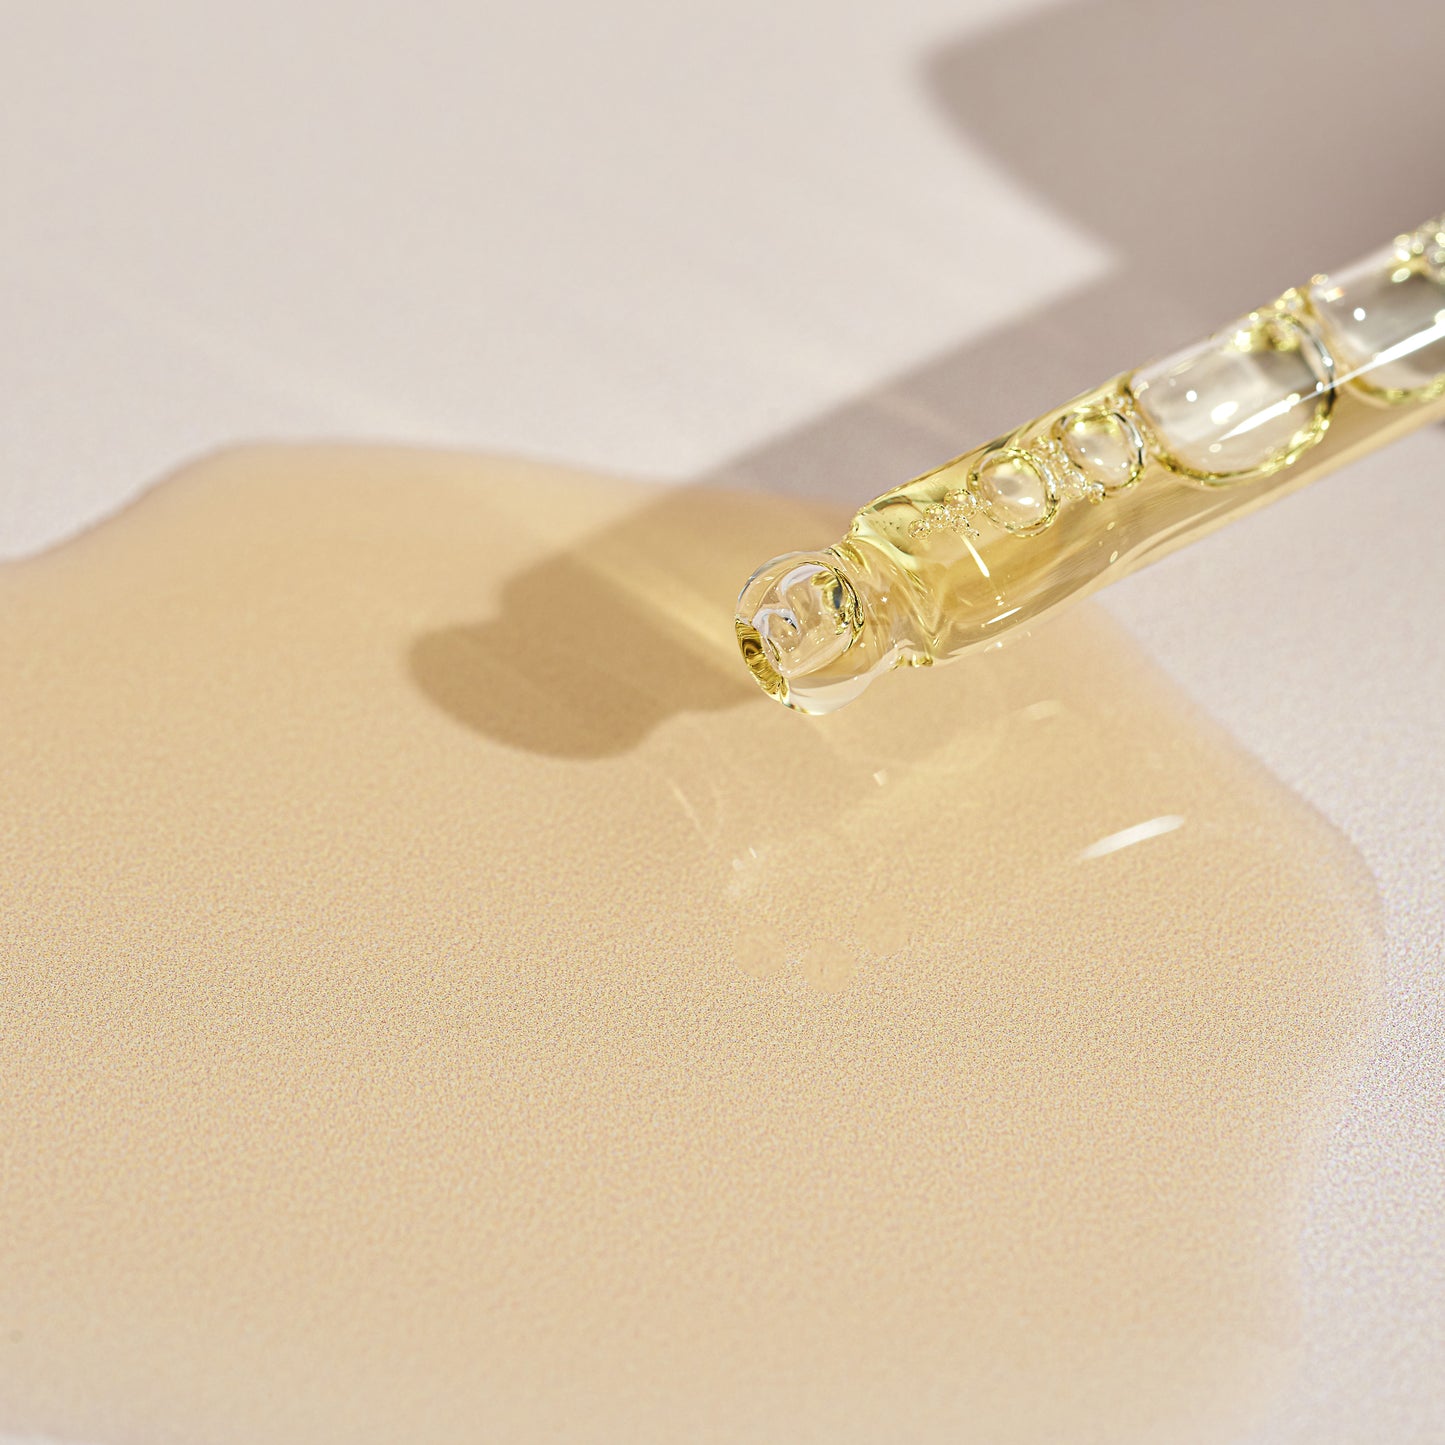 the everyday soft glow oil